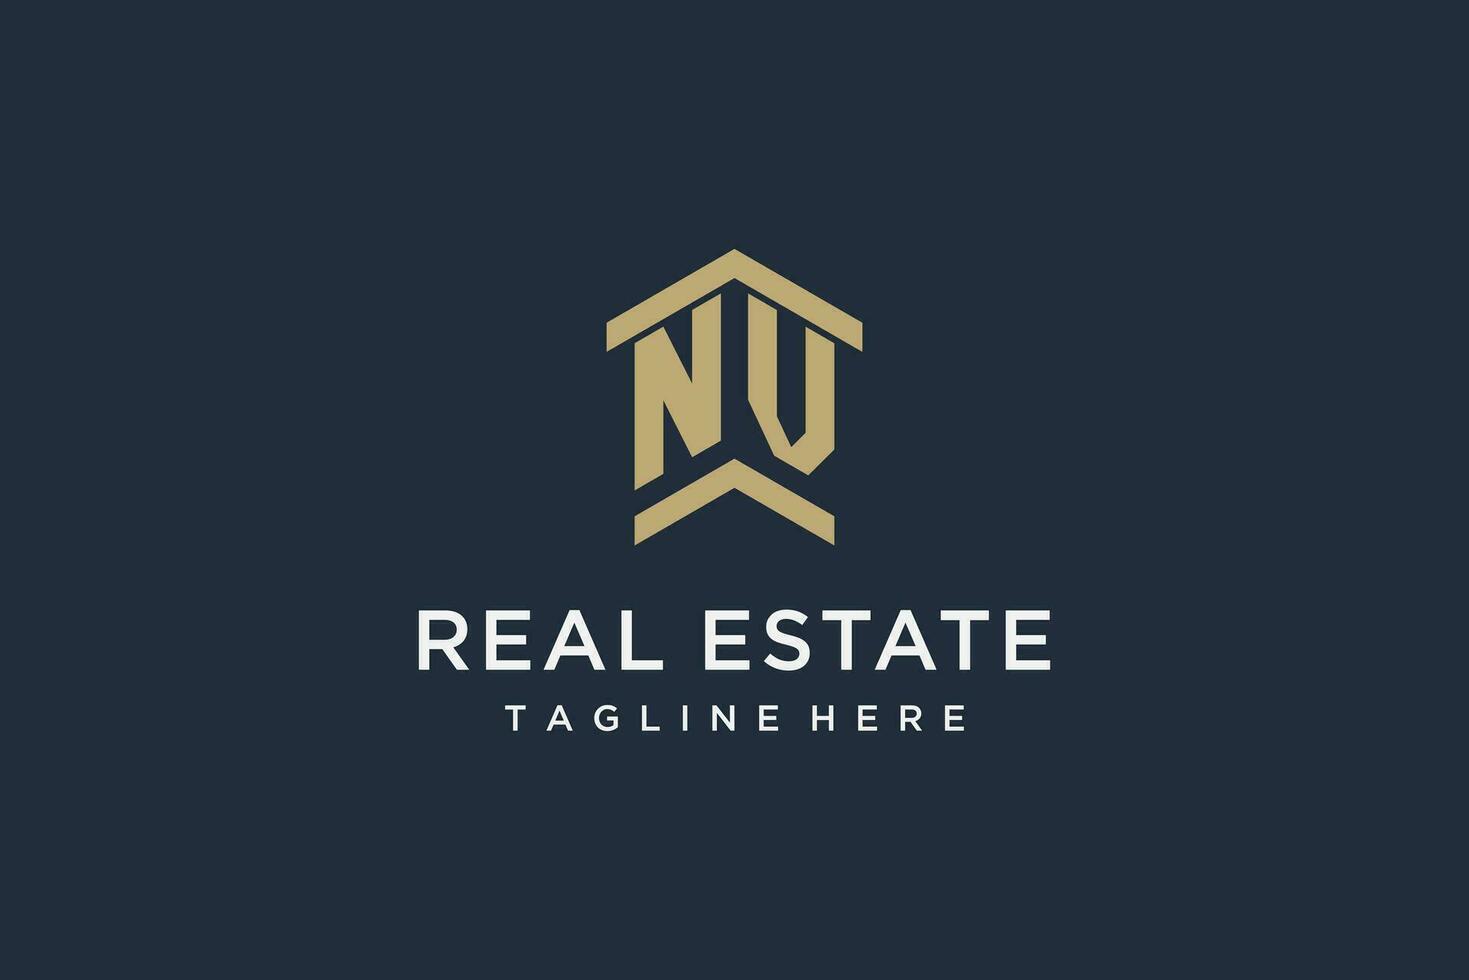 Initial NV logo for real estate with simple and creative house roof icon logo design ideas vector